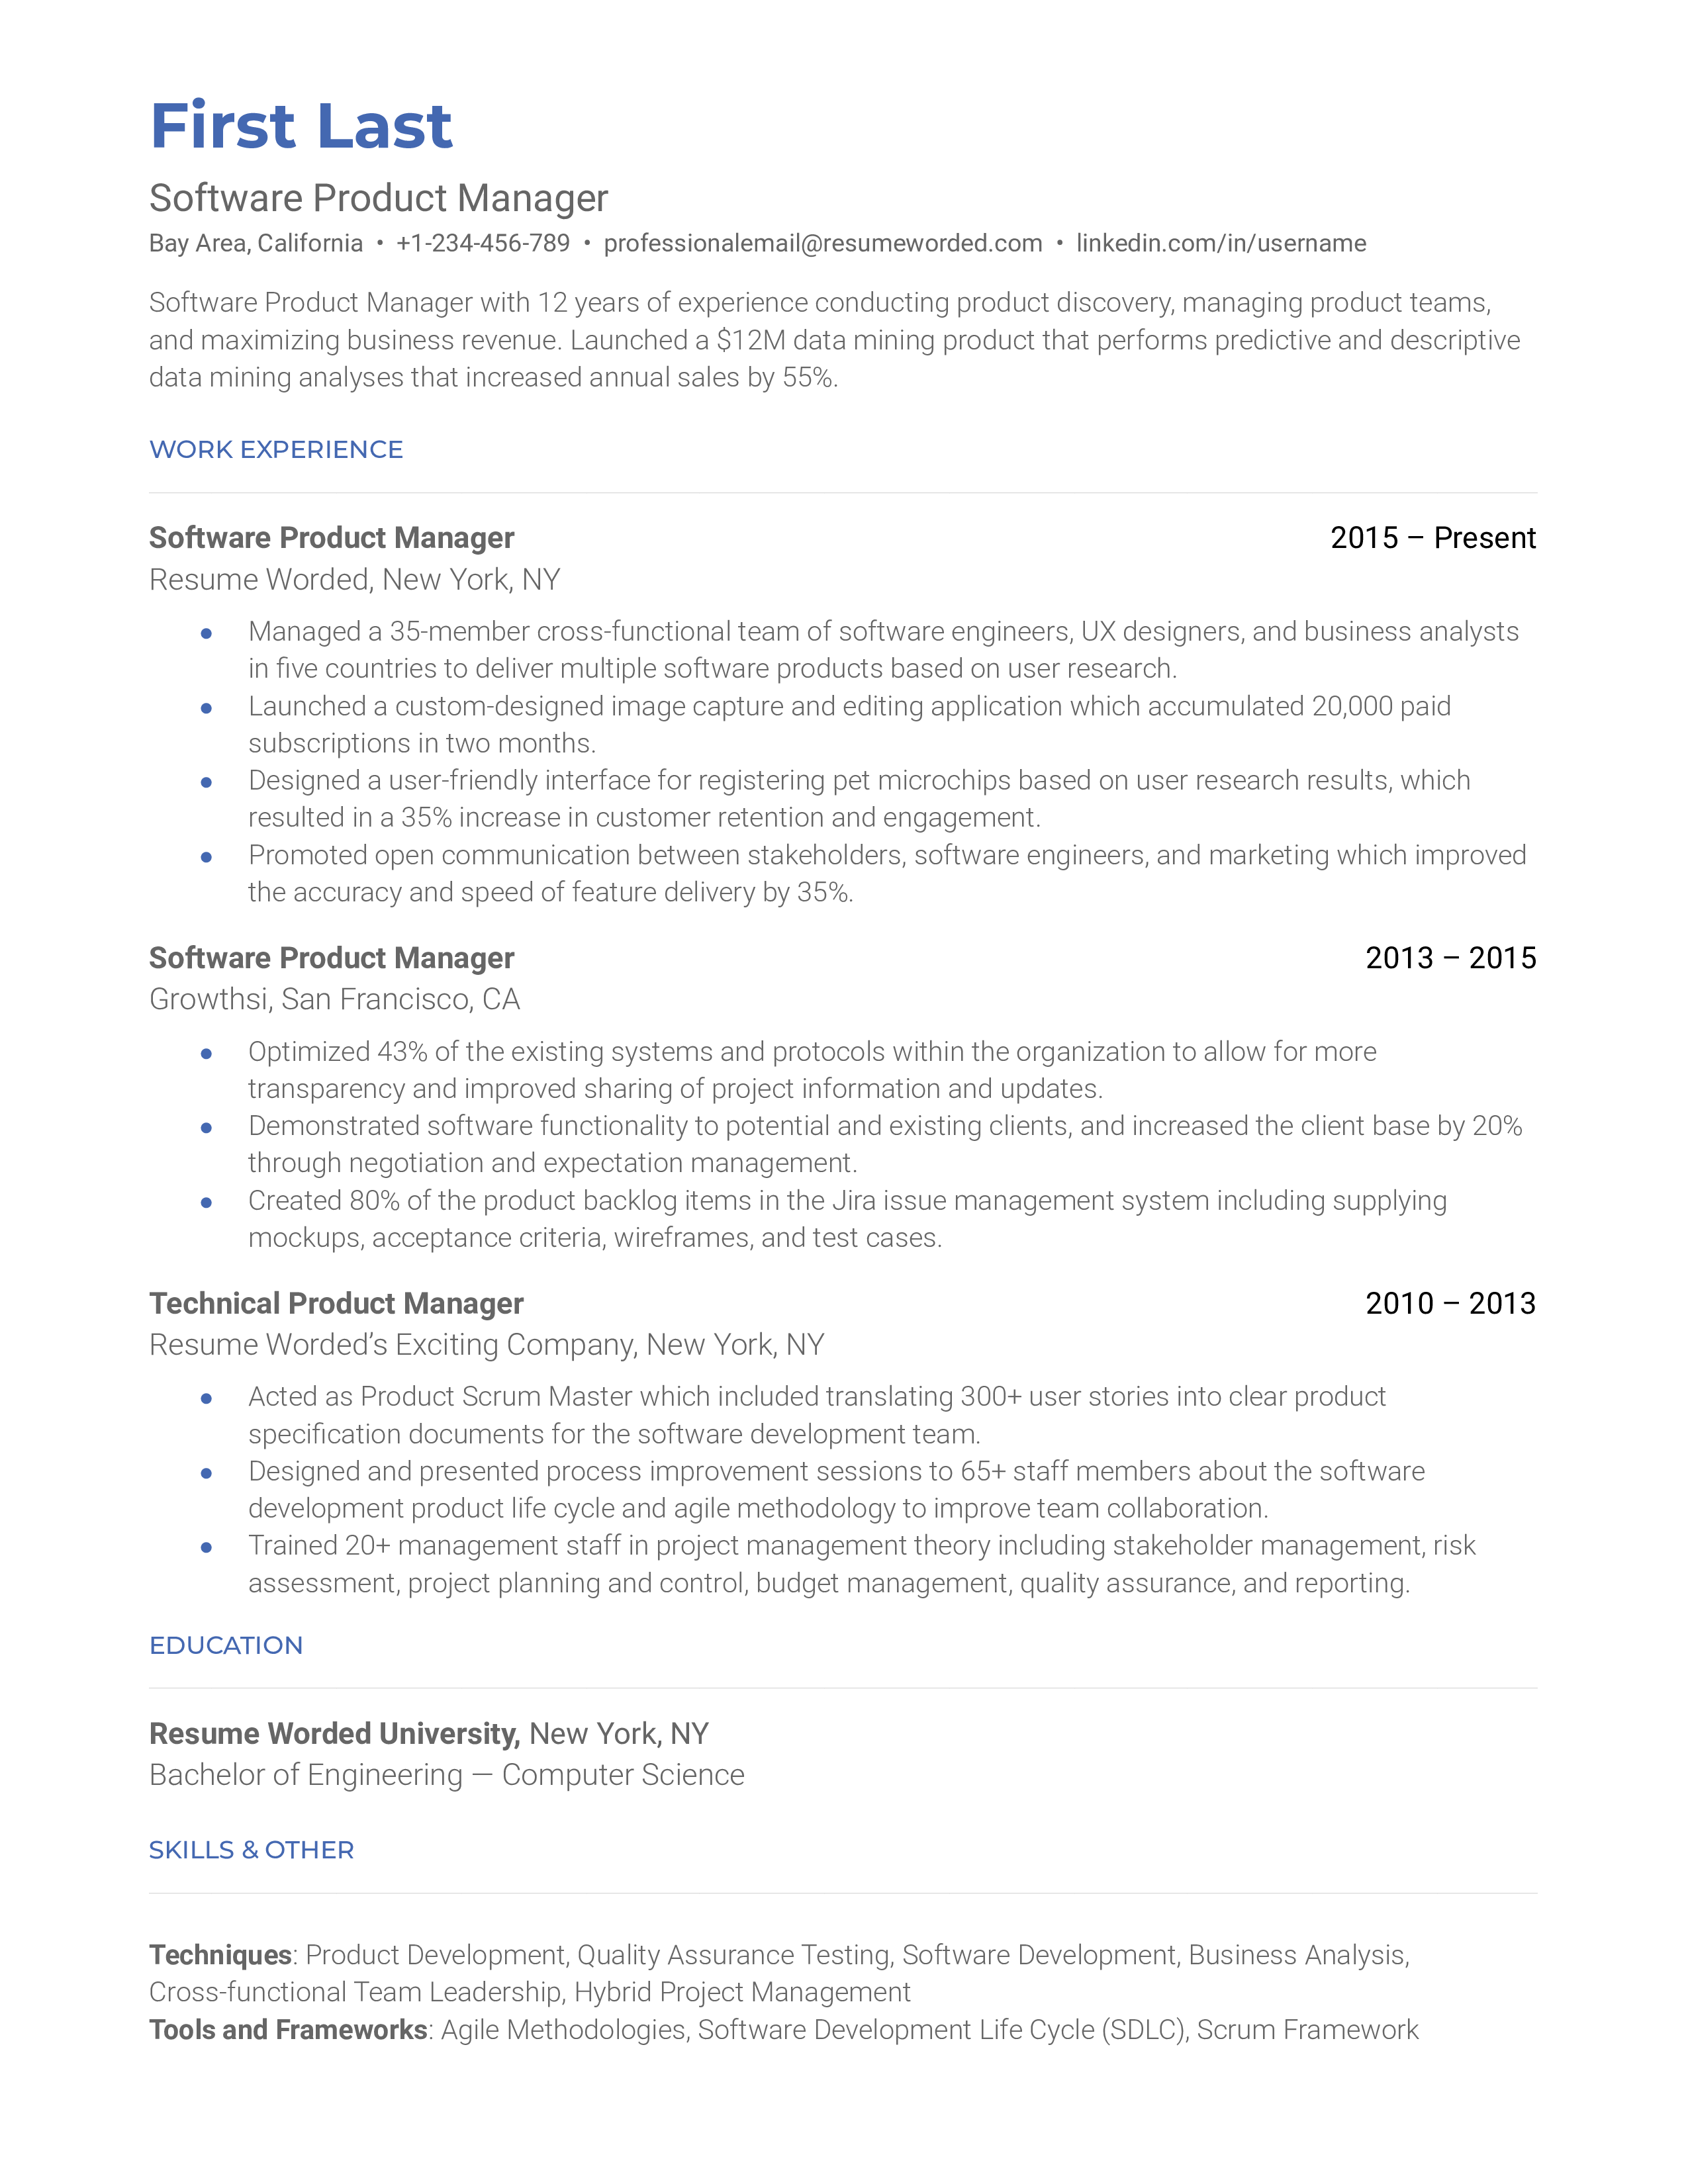 Software Product Manager Resume Sample